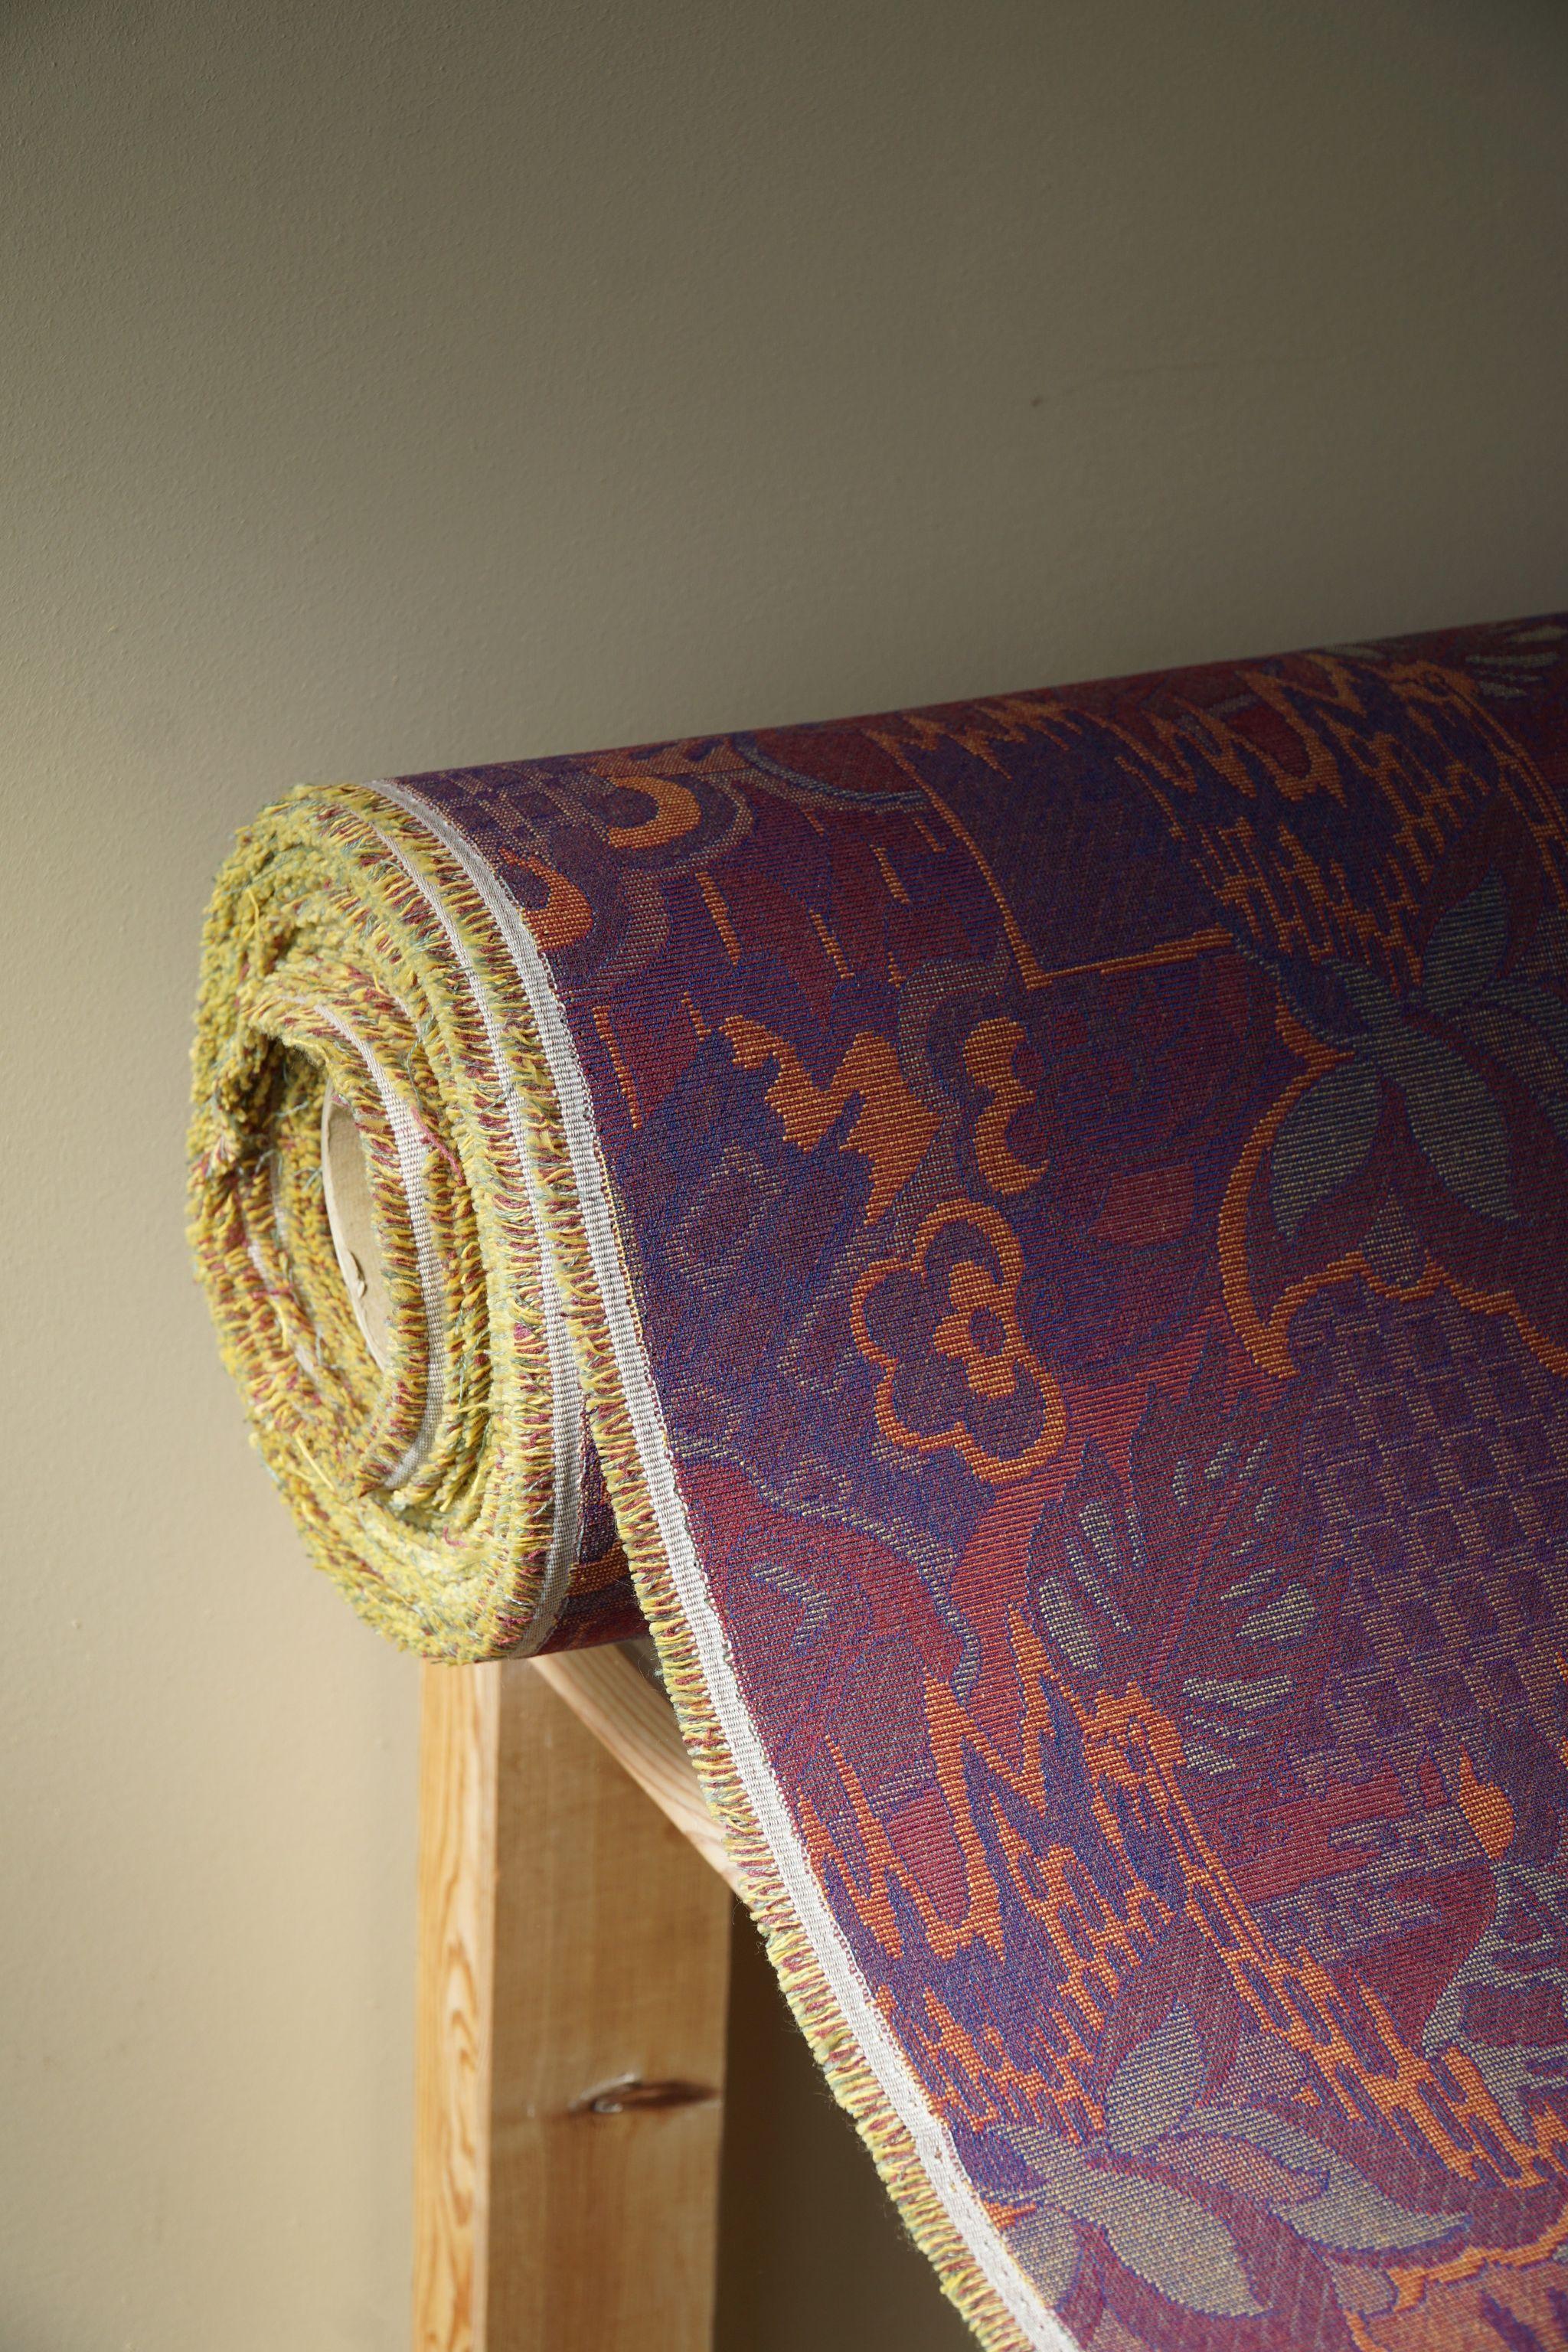 Vintage Gobelin Upholstery Fabric in Various Purple & Orange Colors, Late 20th C For Sale 4